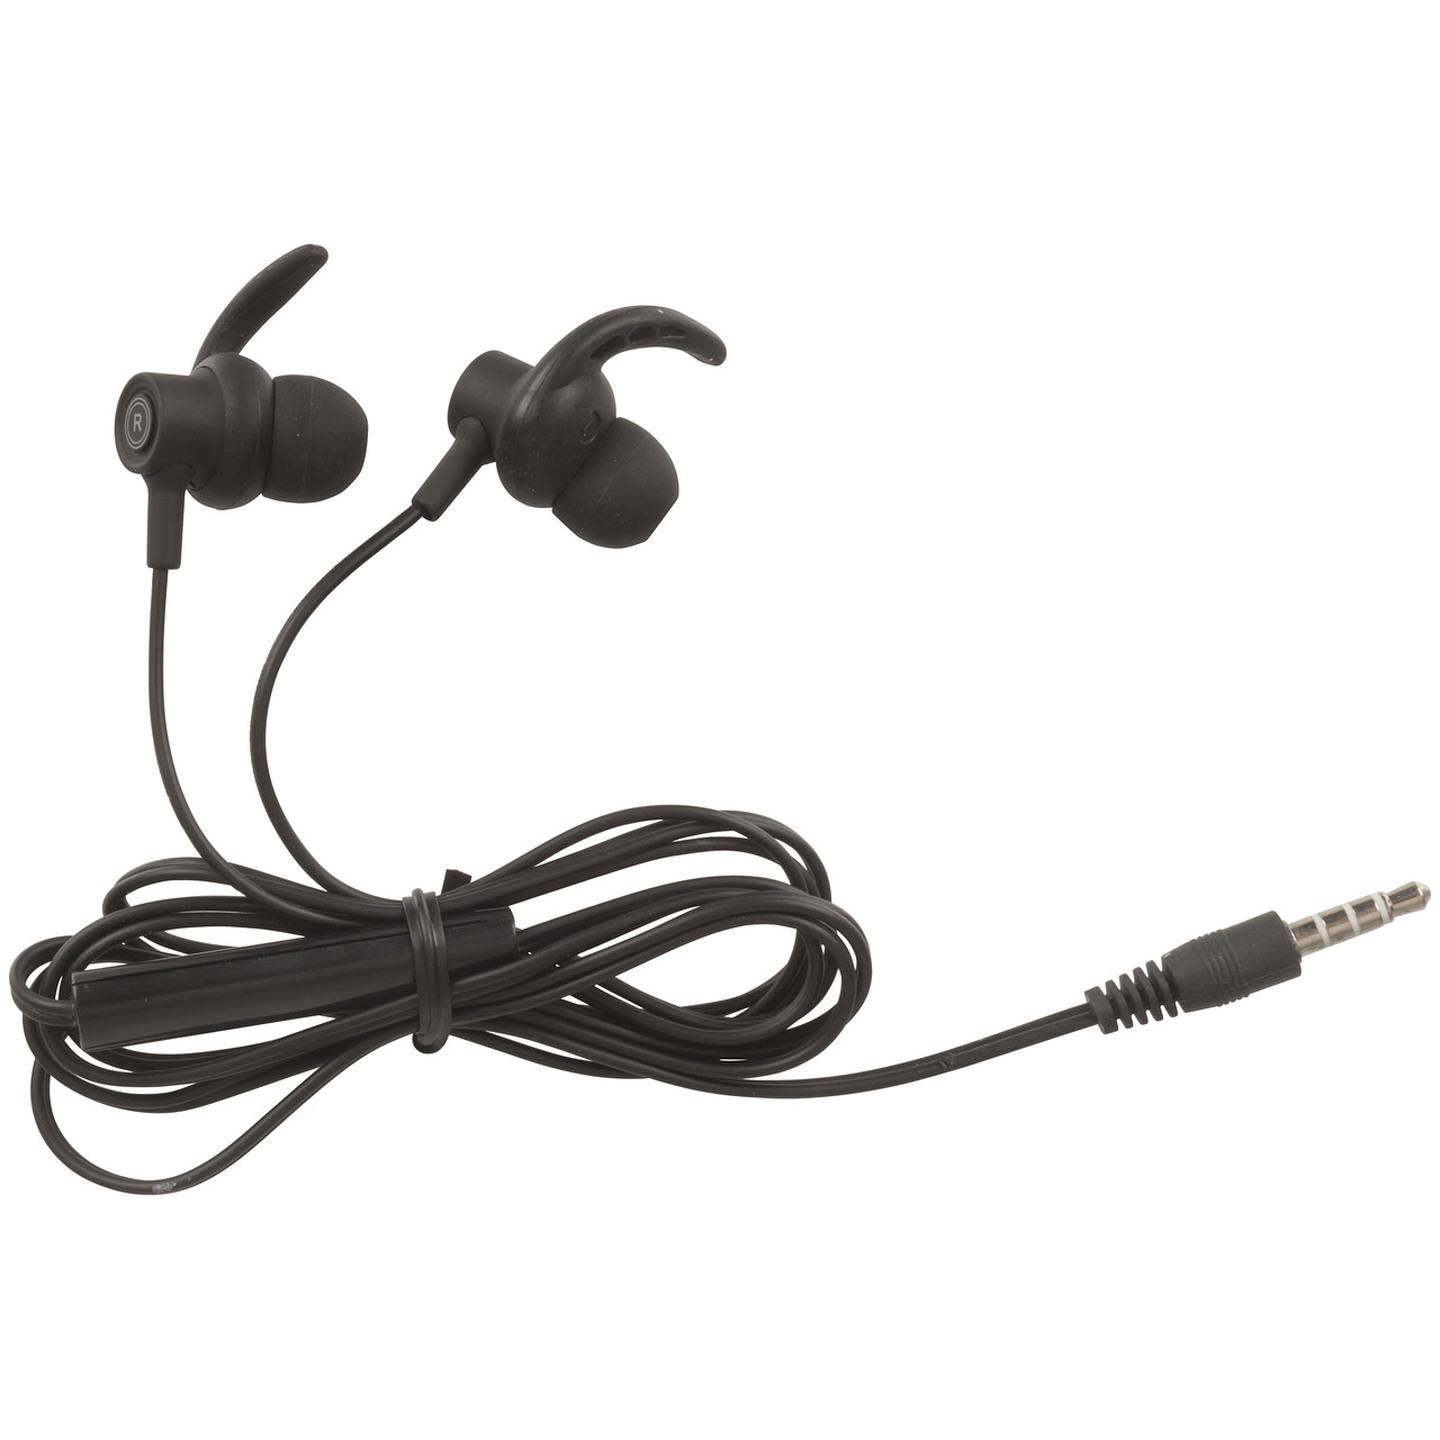 Digitech Stereo Canal Earphones with Microphone